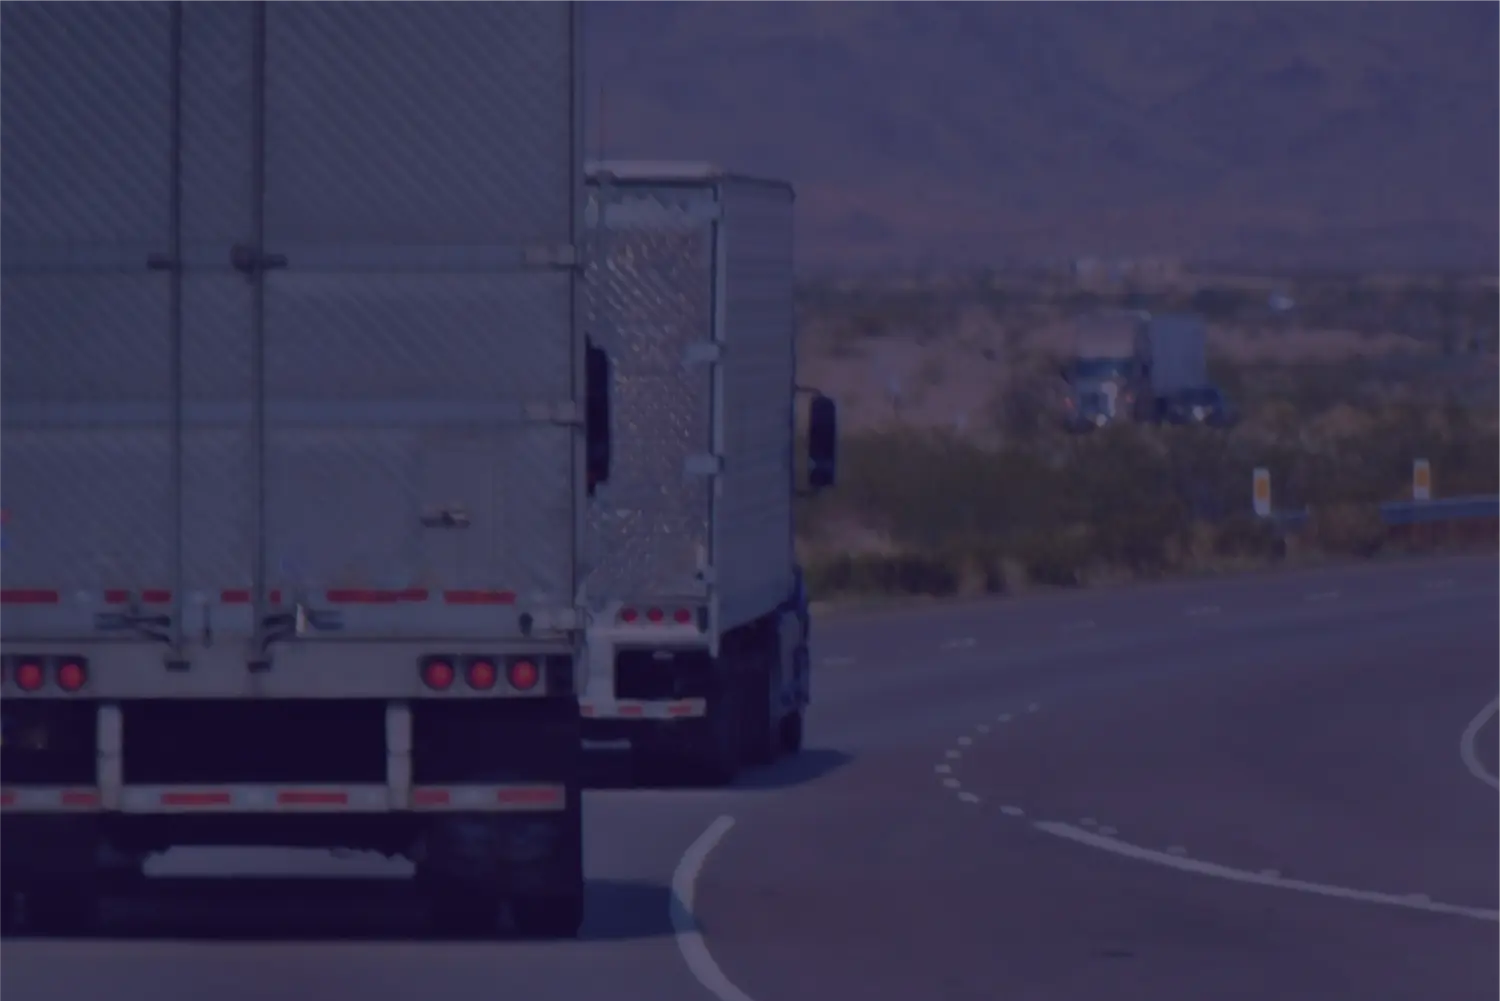 IT Solutions for Transportation and Logistics: How StratusGrid Can Help